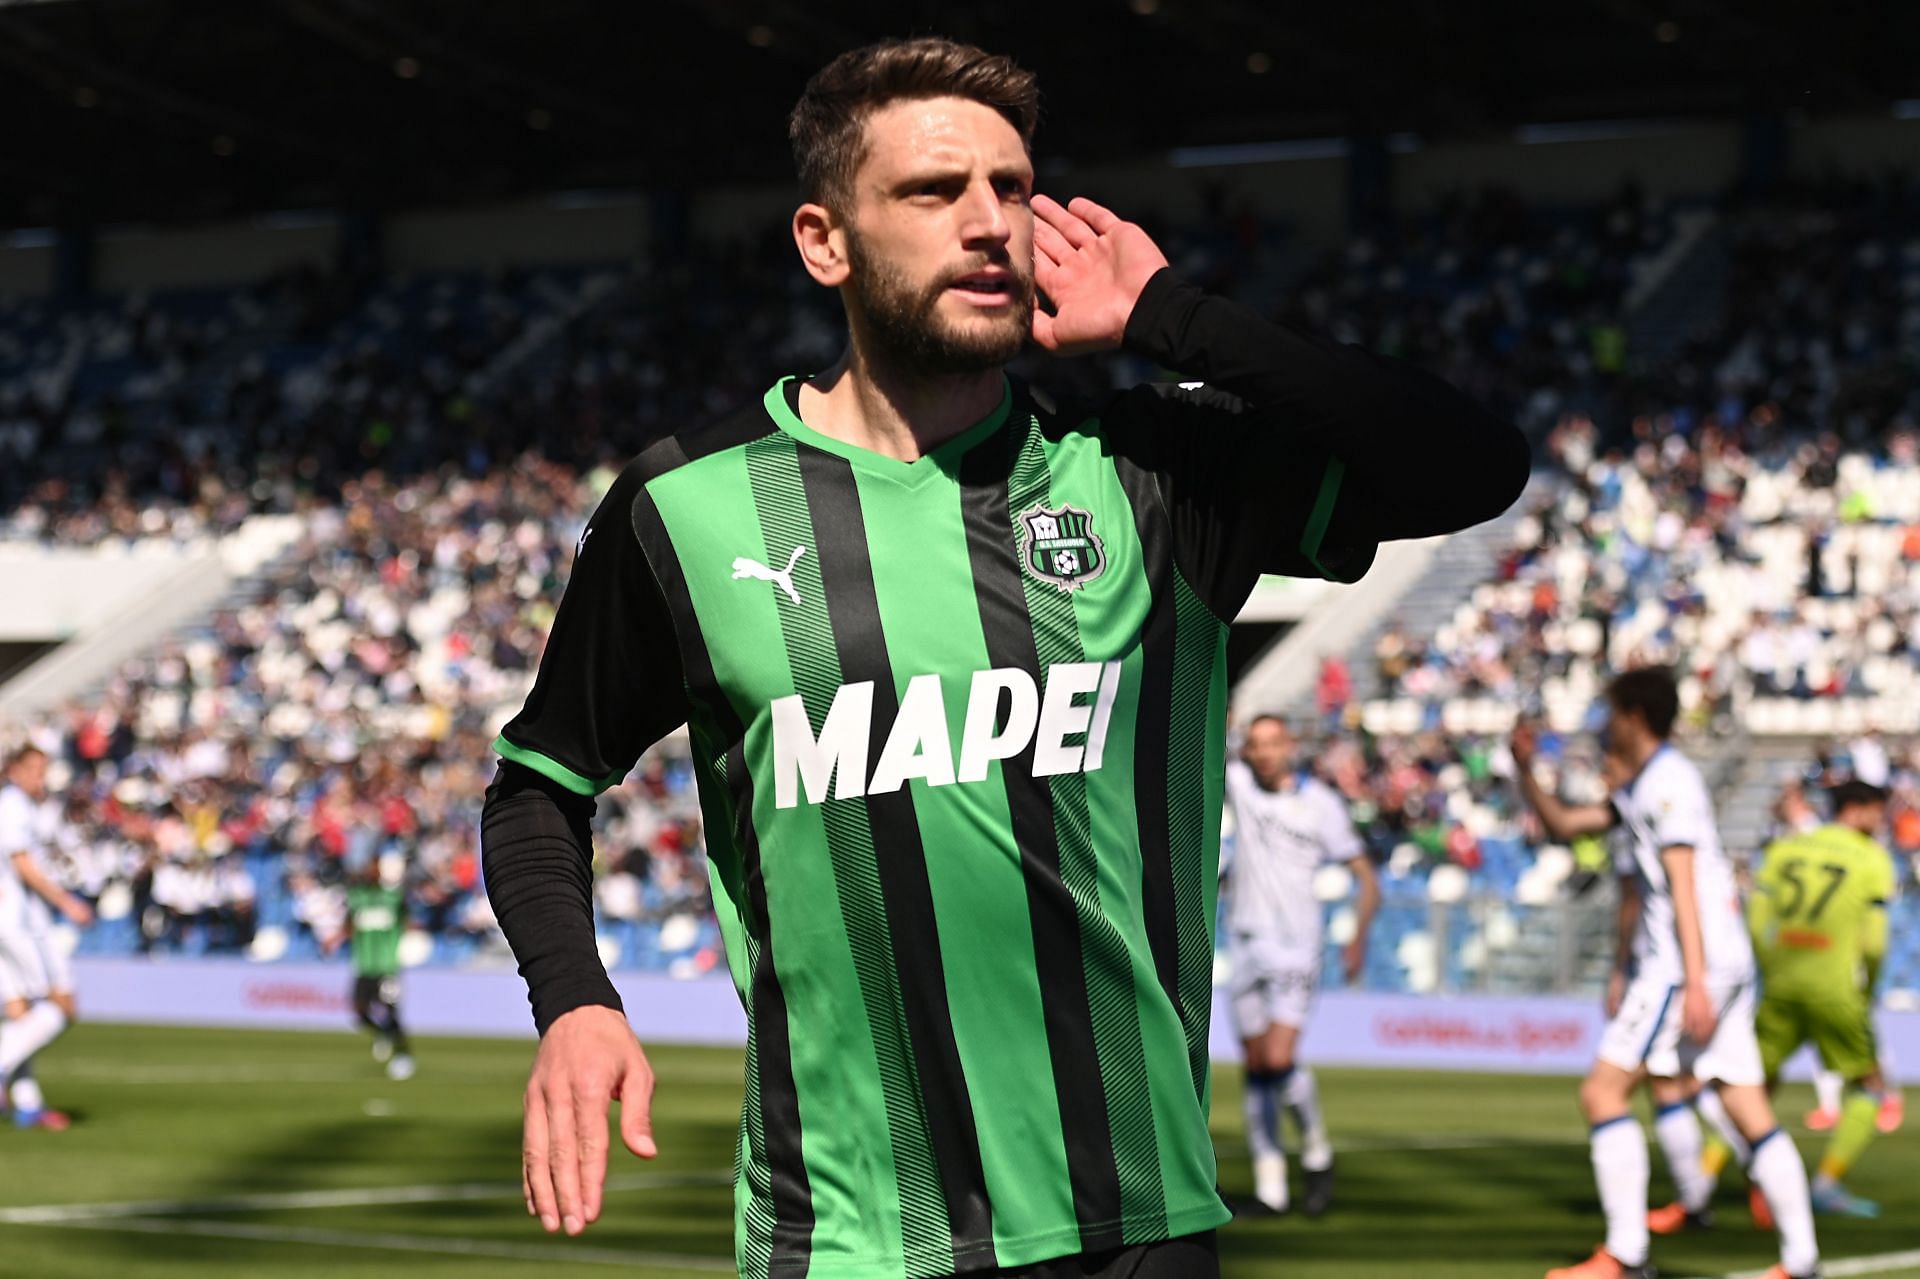 Berardi finished last season with 14 league assists, the most in the league